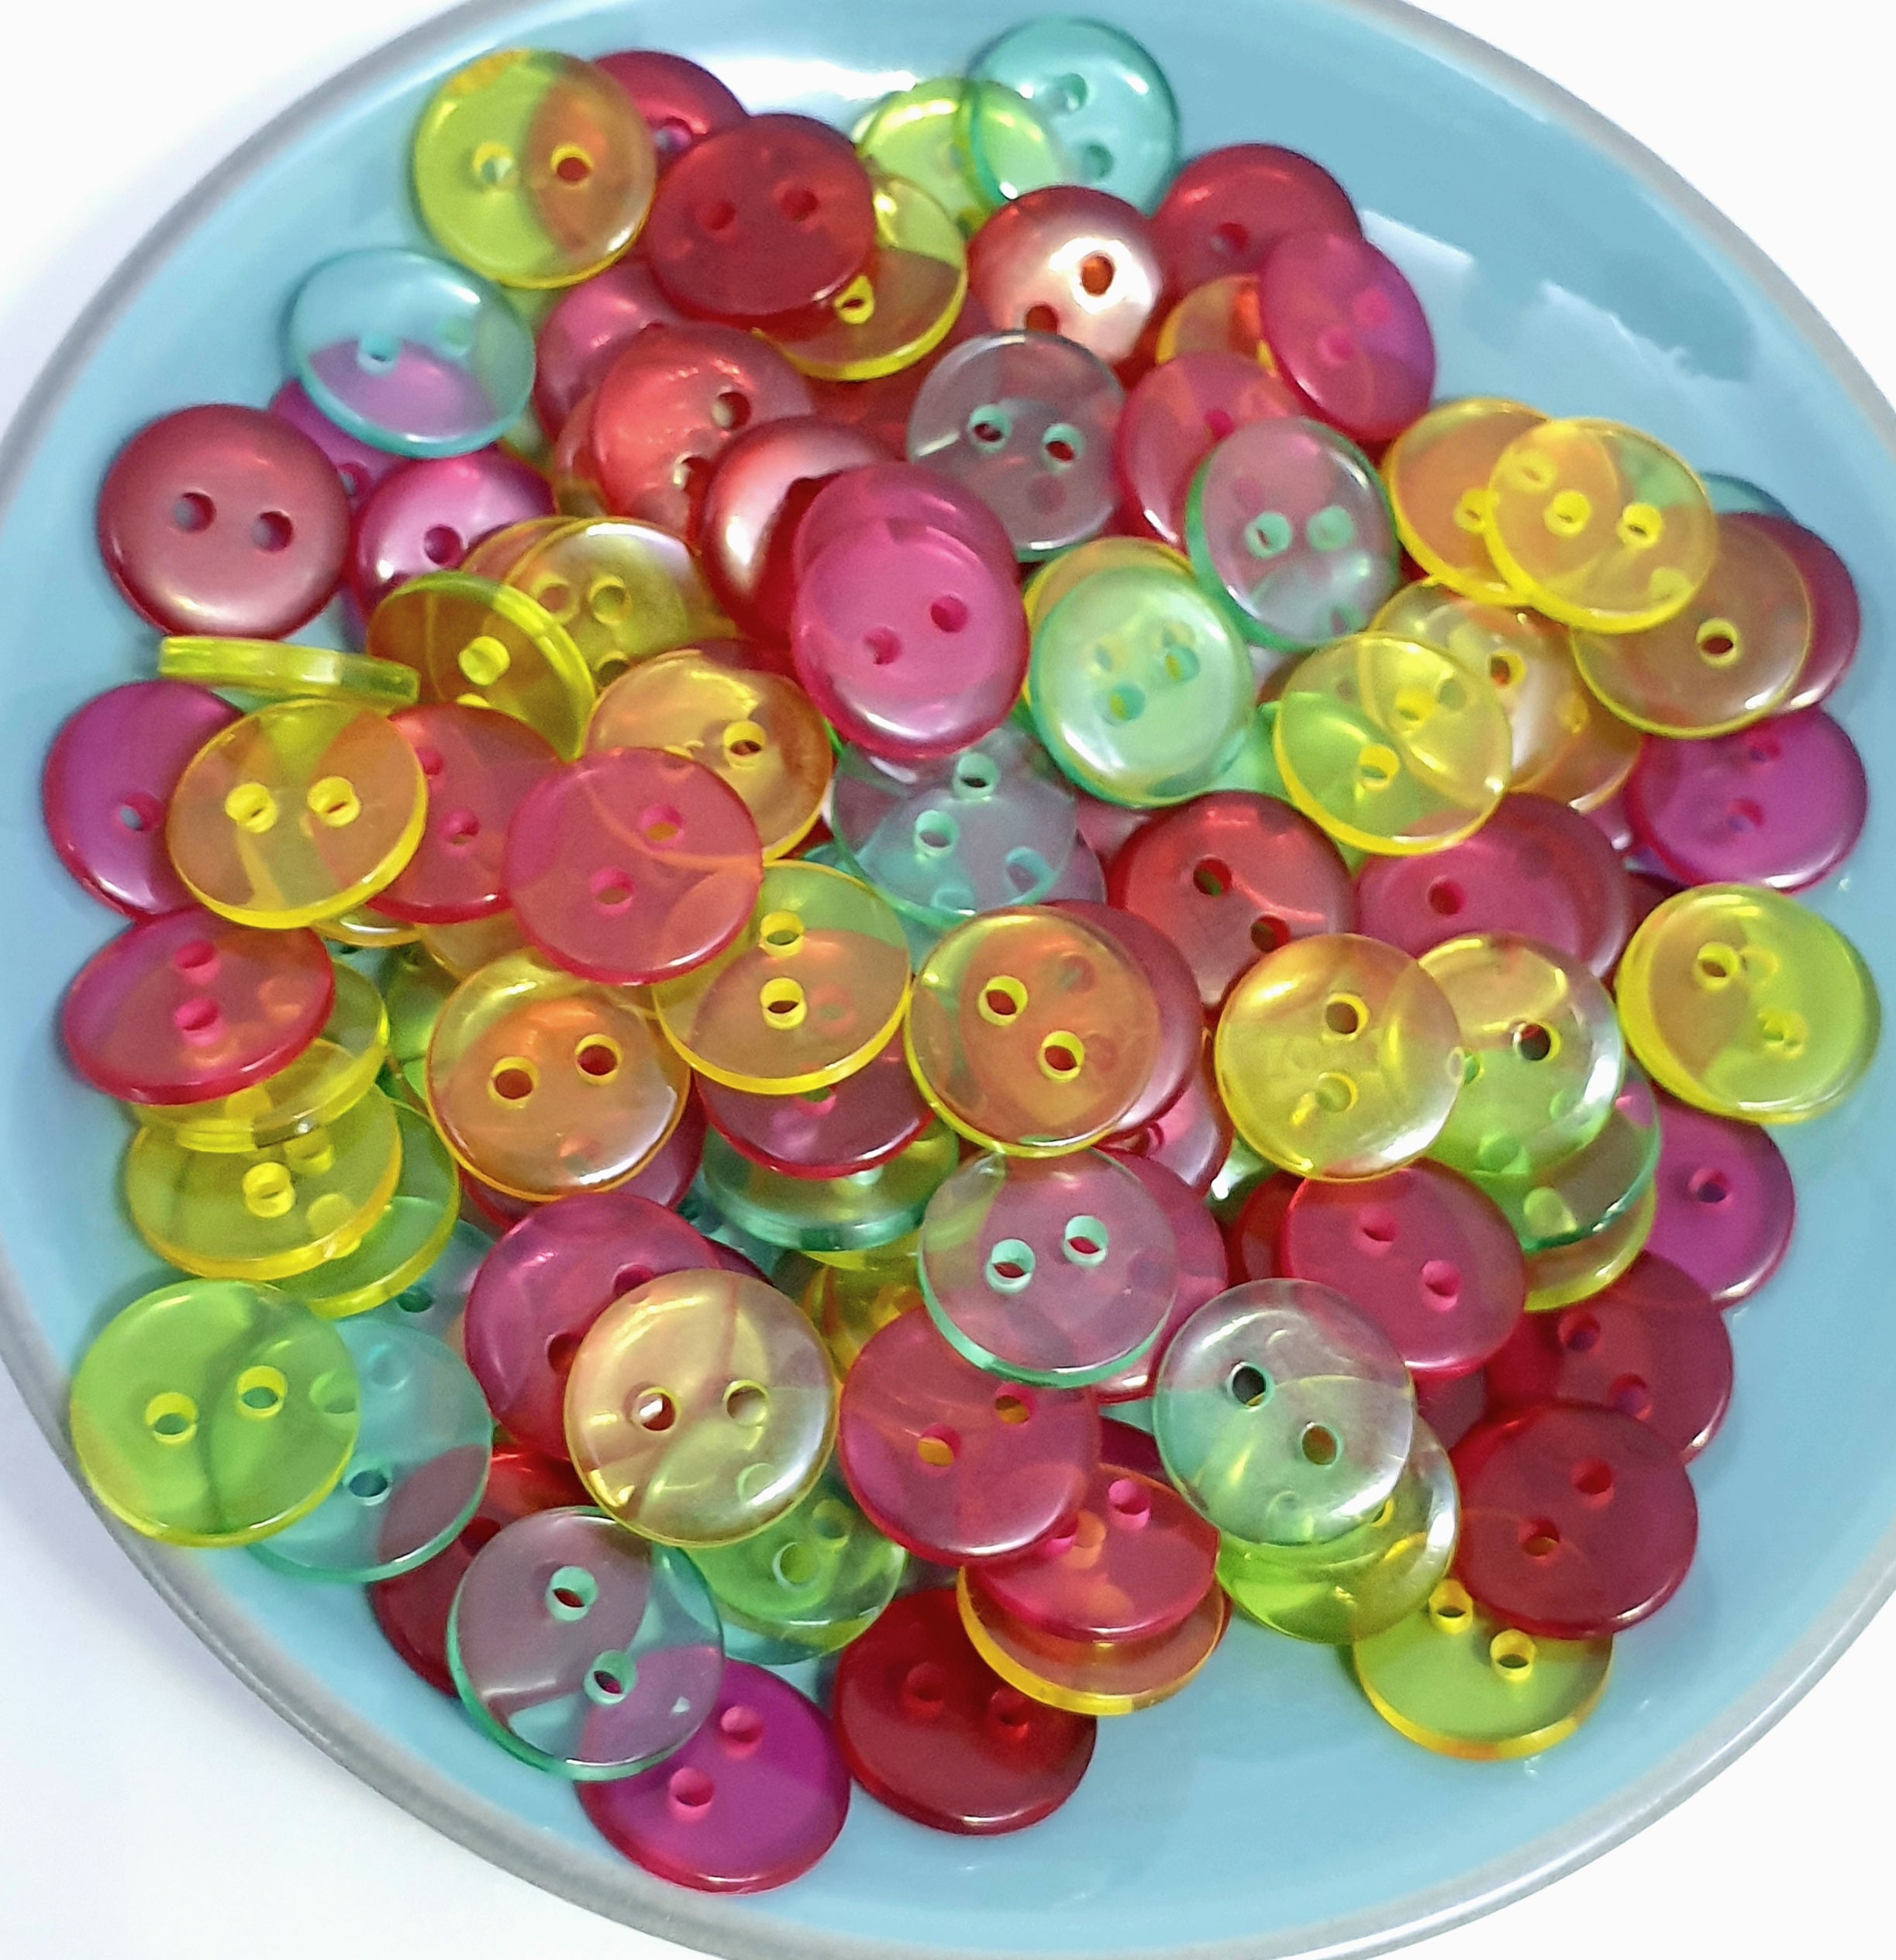 MajorCrafts 150pcs 11mm Mixed Colours 2 Holes Small Round Resin Sewing Buttons